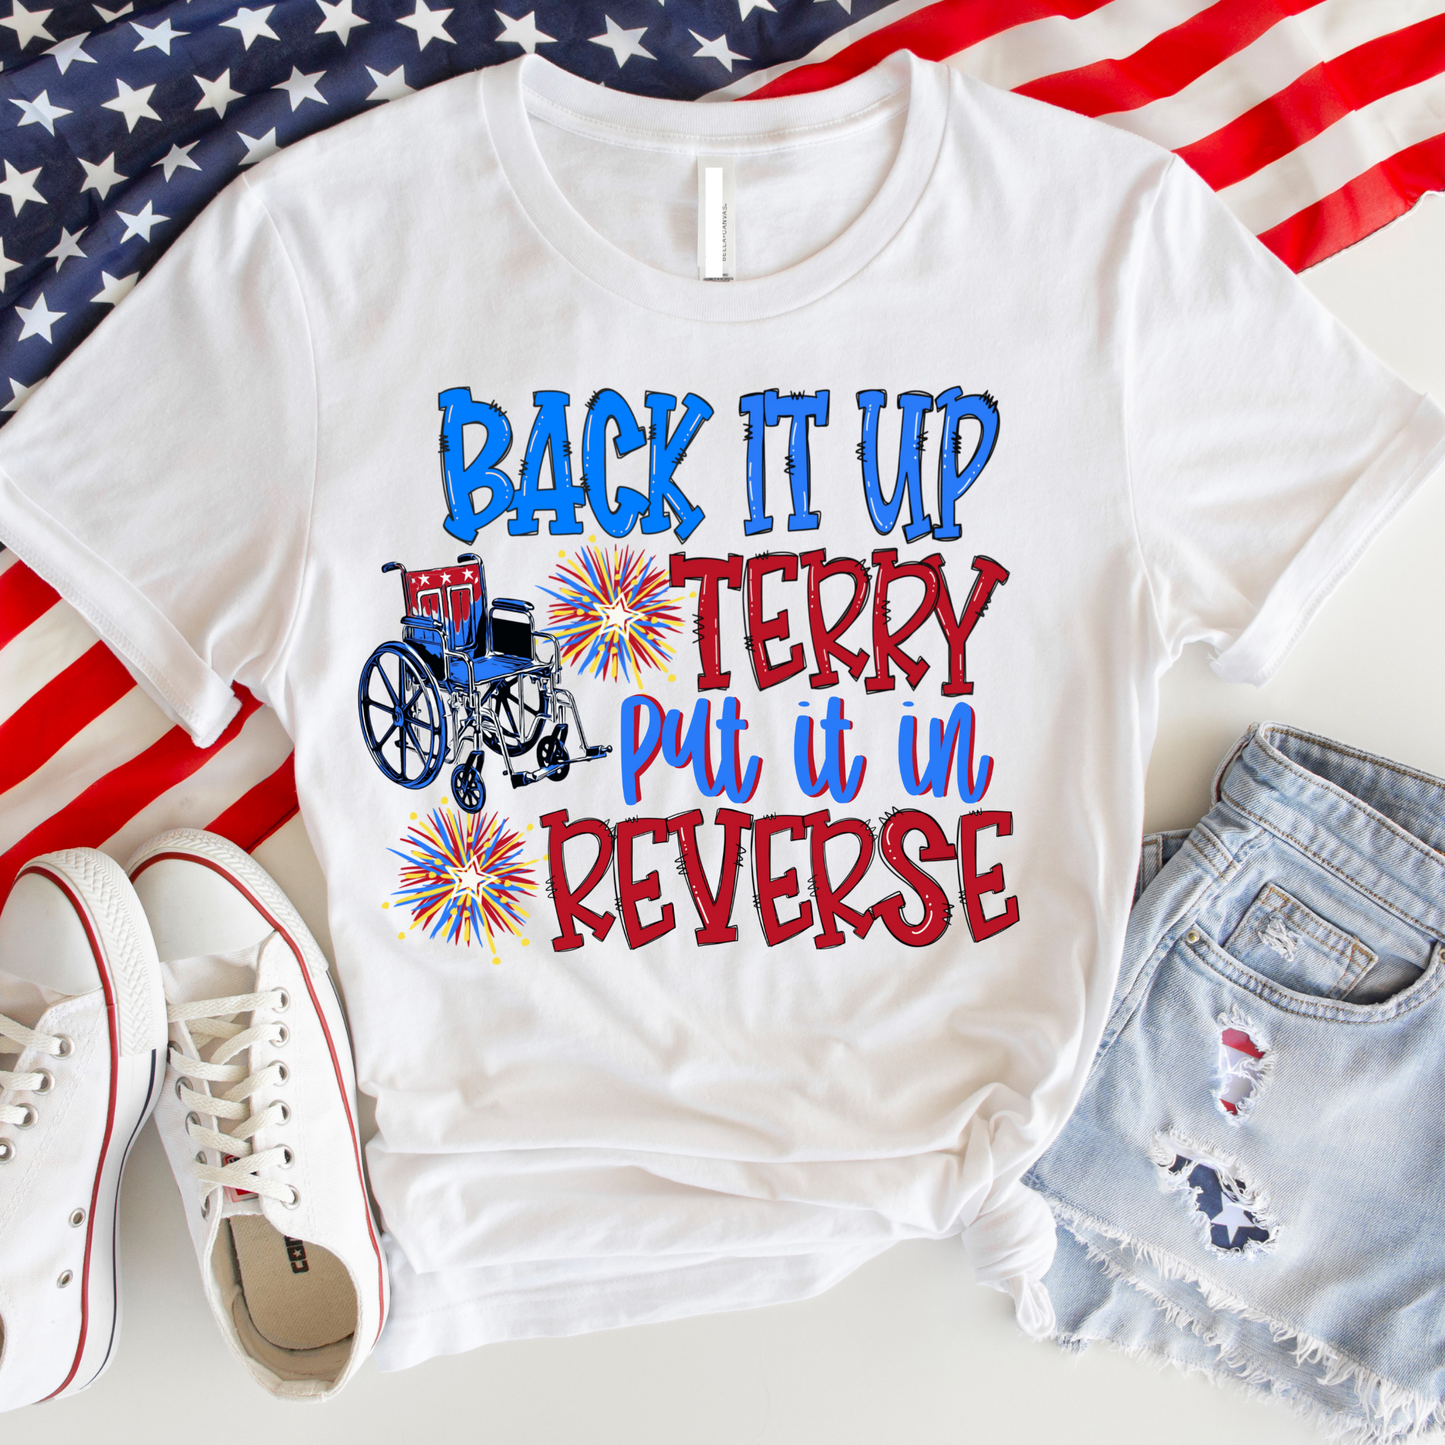 Back It Up Terry Fourth of July T-Shirt